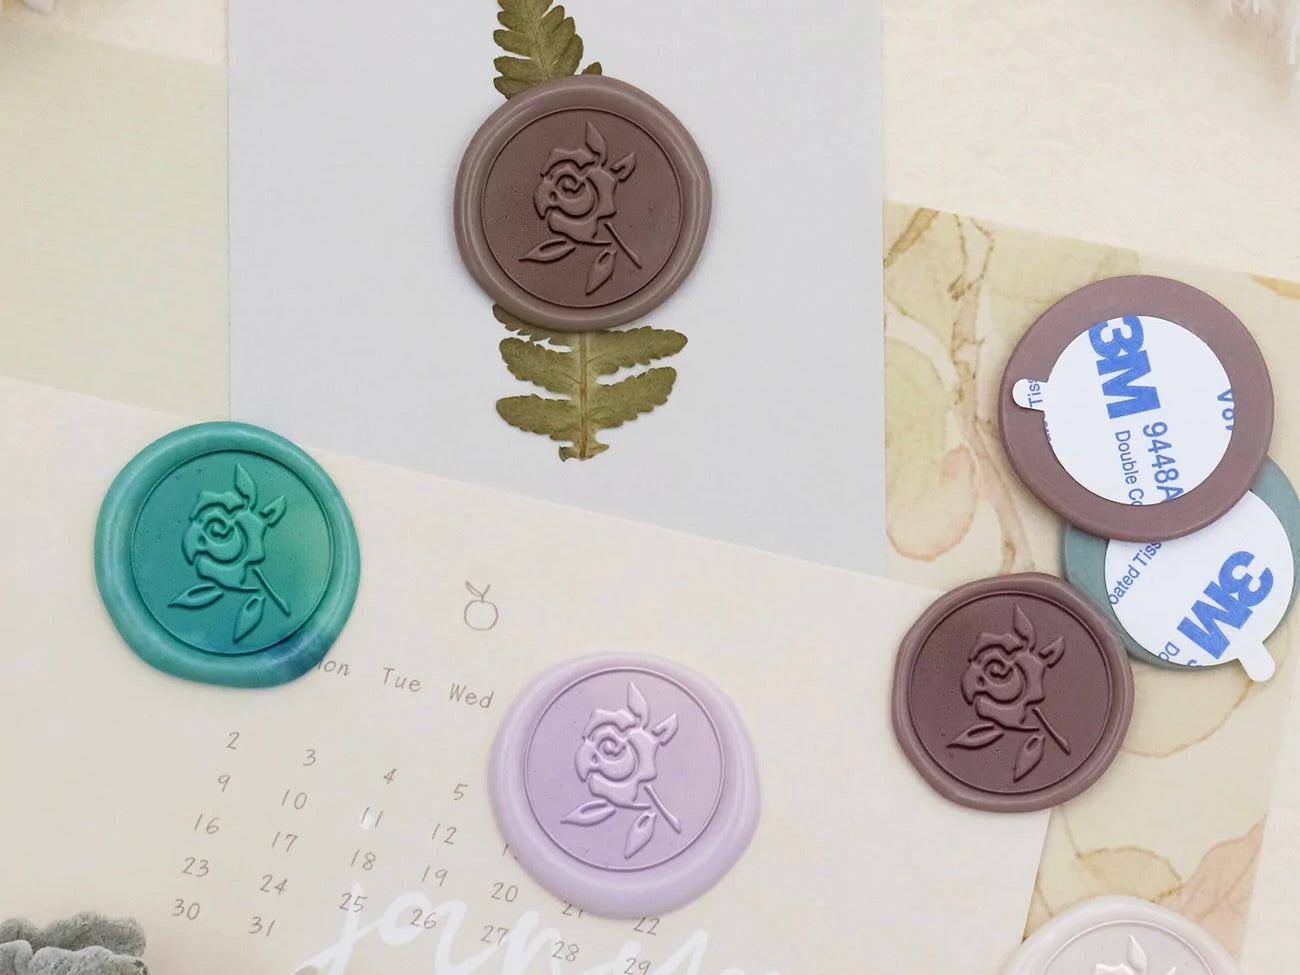 Custom Wax Seal Stickers Personalized Adhesive Wax Seals with Logo Design  Ideal for Wedding Invitations Envelope Journal Scrapbook-Own Design